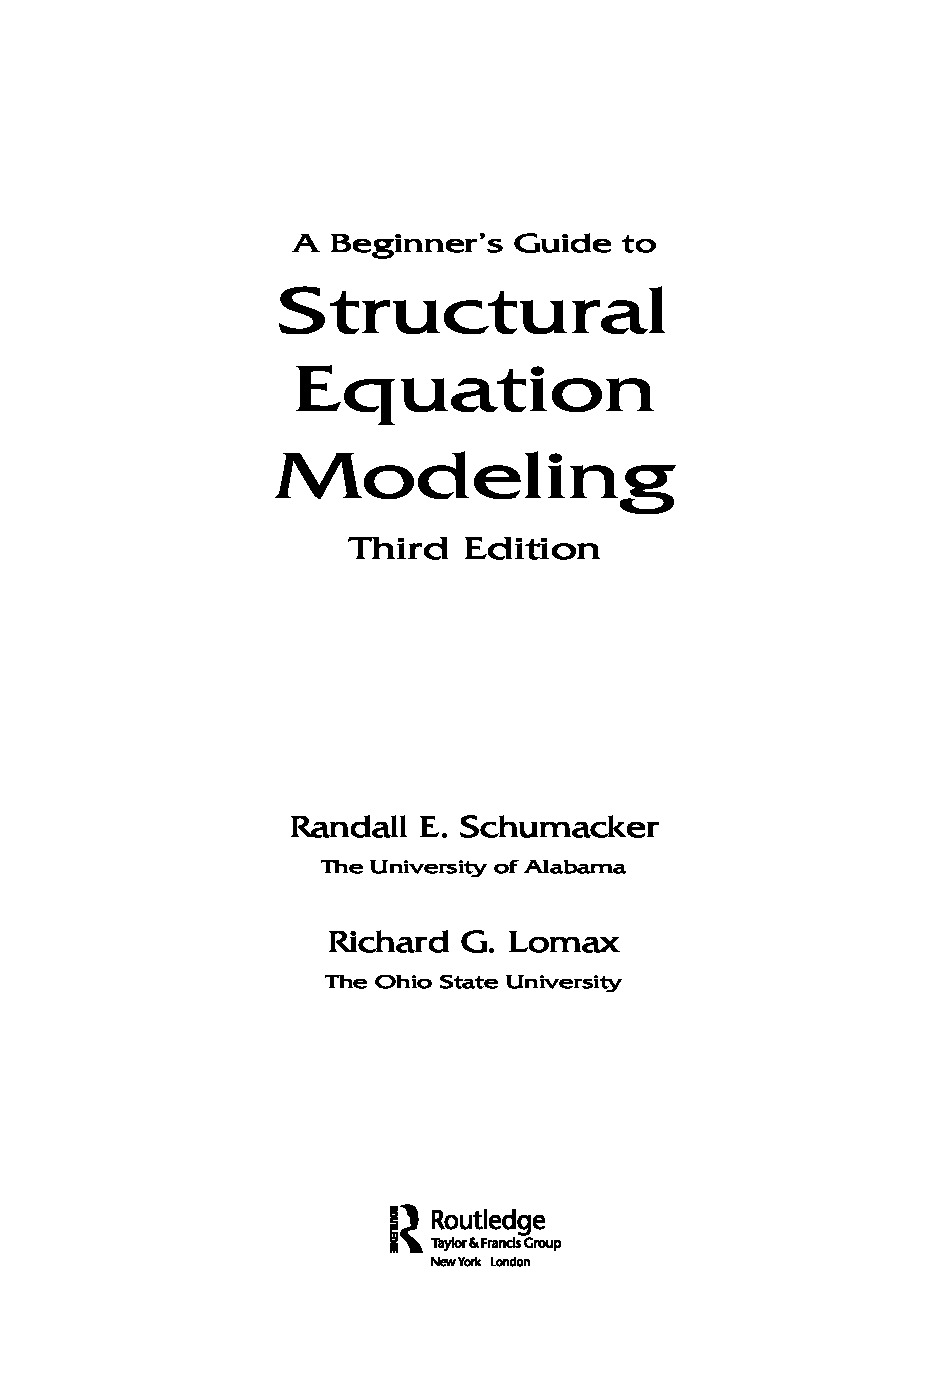 A_Beginners_Guide_to_Structural_Equation_Modeling_3rd_ed